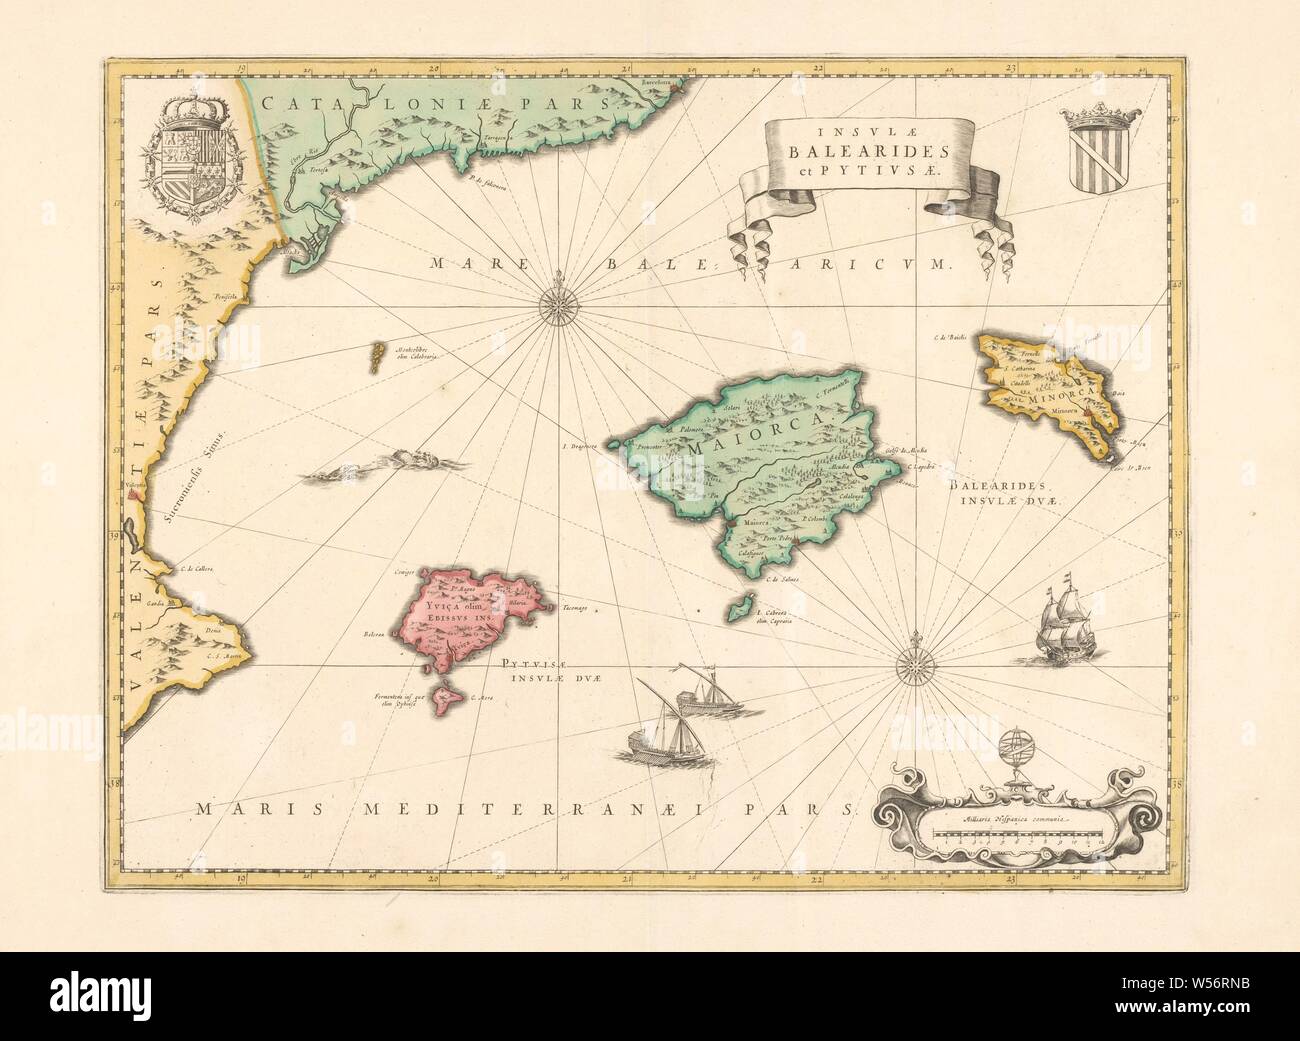 Cartography in the Netherlands, map of the Balearic and Pityus and coast of Spain, Map of Balearic and Pityus and part of coast of Spain, bordered yellow, colored areas, 2 compass roses: m.b. and r.o. Crowned coat of arms r.b, crowned coat of arms with golden fleece l.b .. Ships in the sea, r.o. scale in Spanish miles with a globe on it. Inscription, r.b .: INSVLAE / BALEARIDES / et PITYVSAE, Balearic Islands, Willem Janszoon Blaeu, Amsterdam, 1600 - 1650, paper, engraving, h 37.9 cm × w 49.2 cm Stock Photo